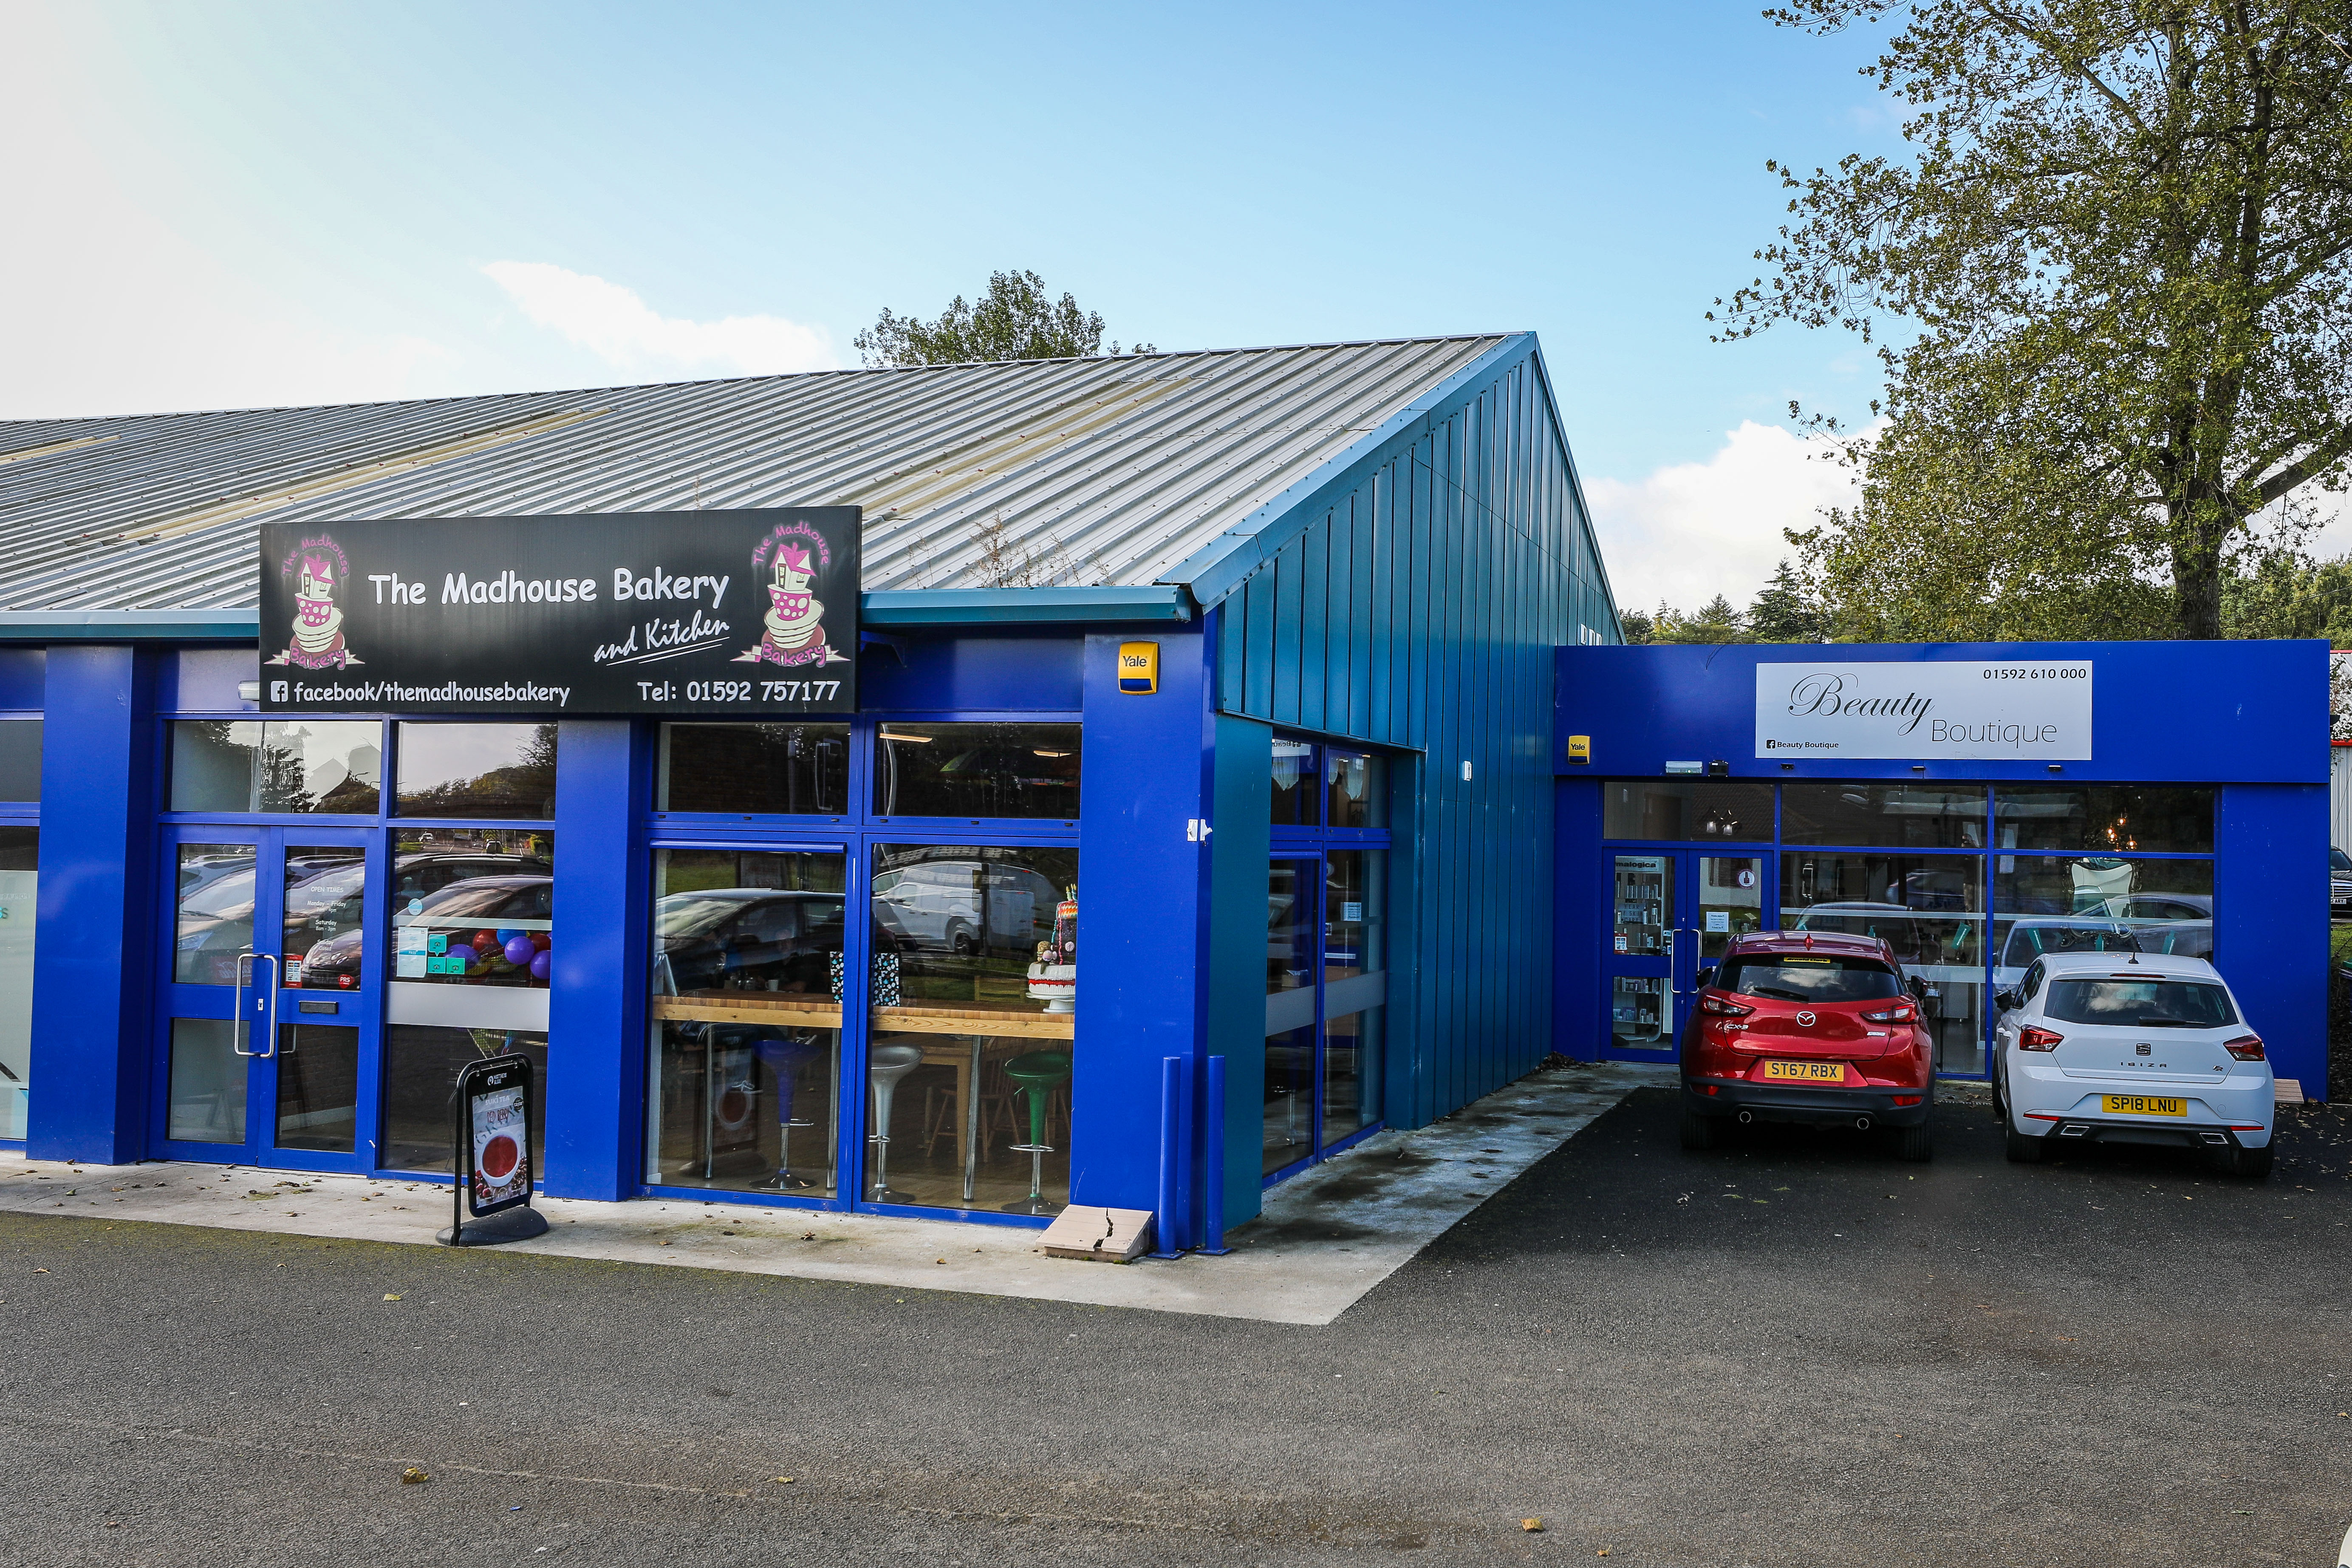 Courier News - Fife - Neil Henderson - M`dhouse bakery robbed story - CR0014045 - Glenrothes - Picture Shows: Madhouse Bakery and Beauty Boutique which was broken into and the collection tin for Love Oliver has been stolen - Wednesday 11th September 2019 - Steve Brown / DCT Media